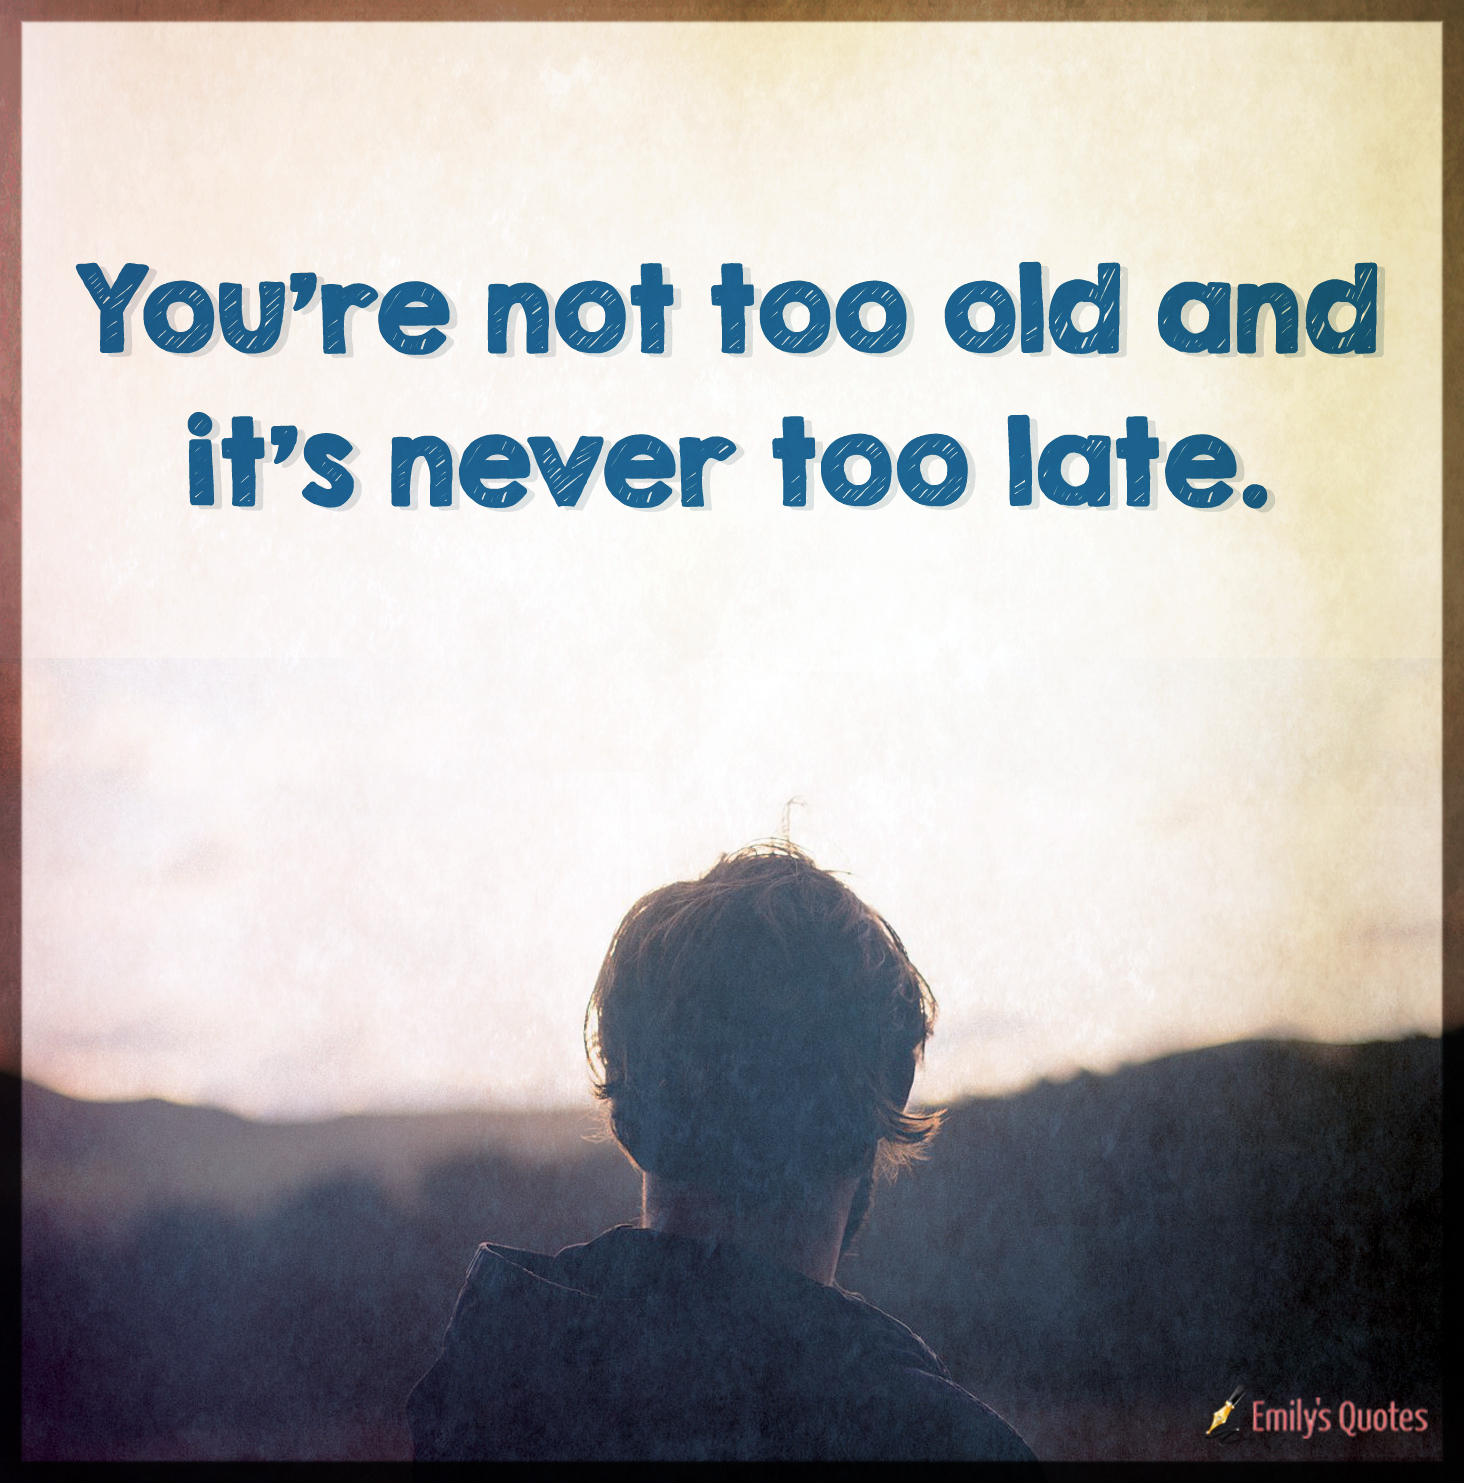 You’re not too old and it’s never too late